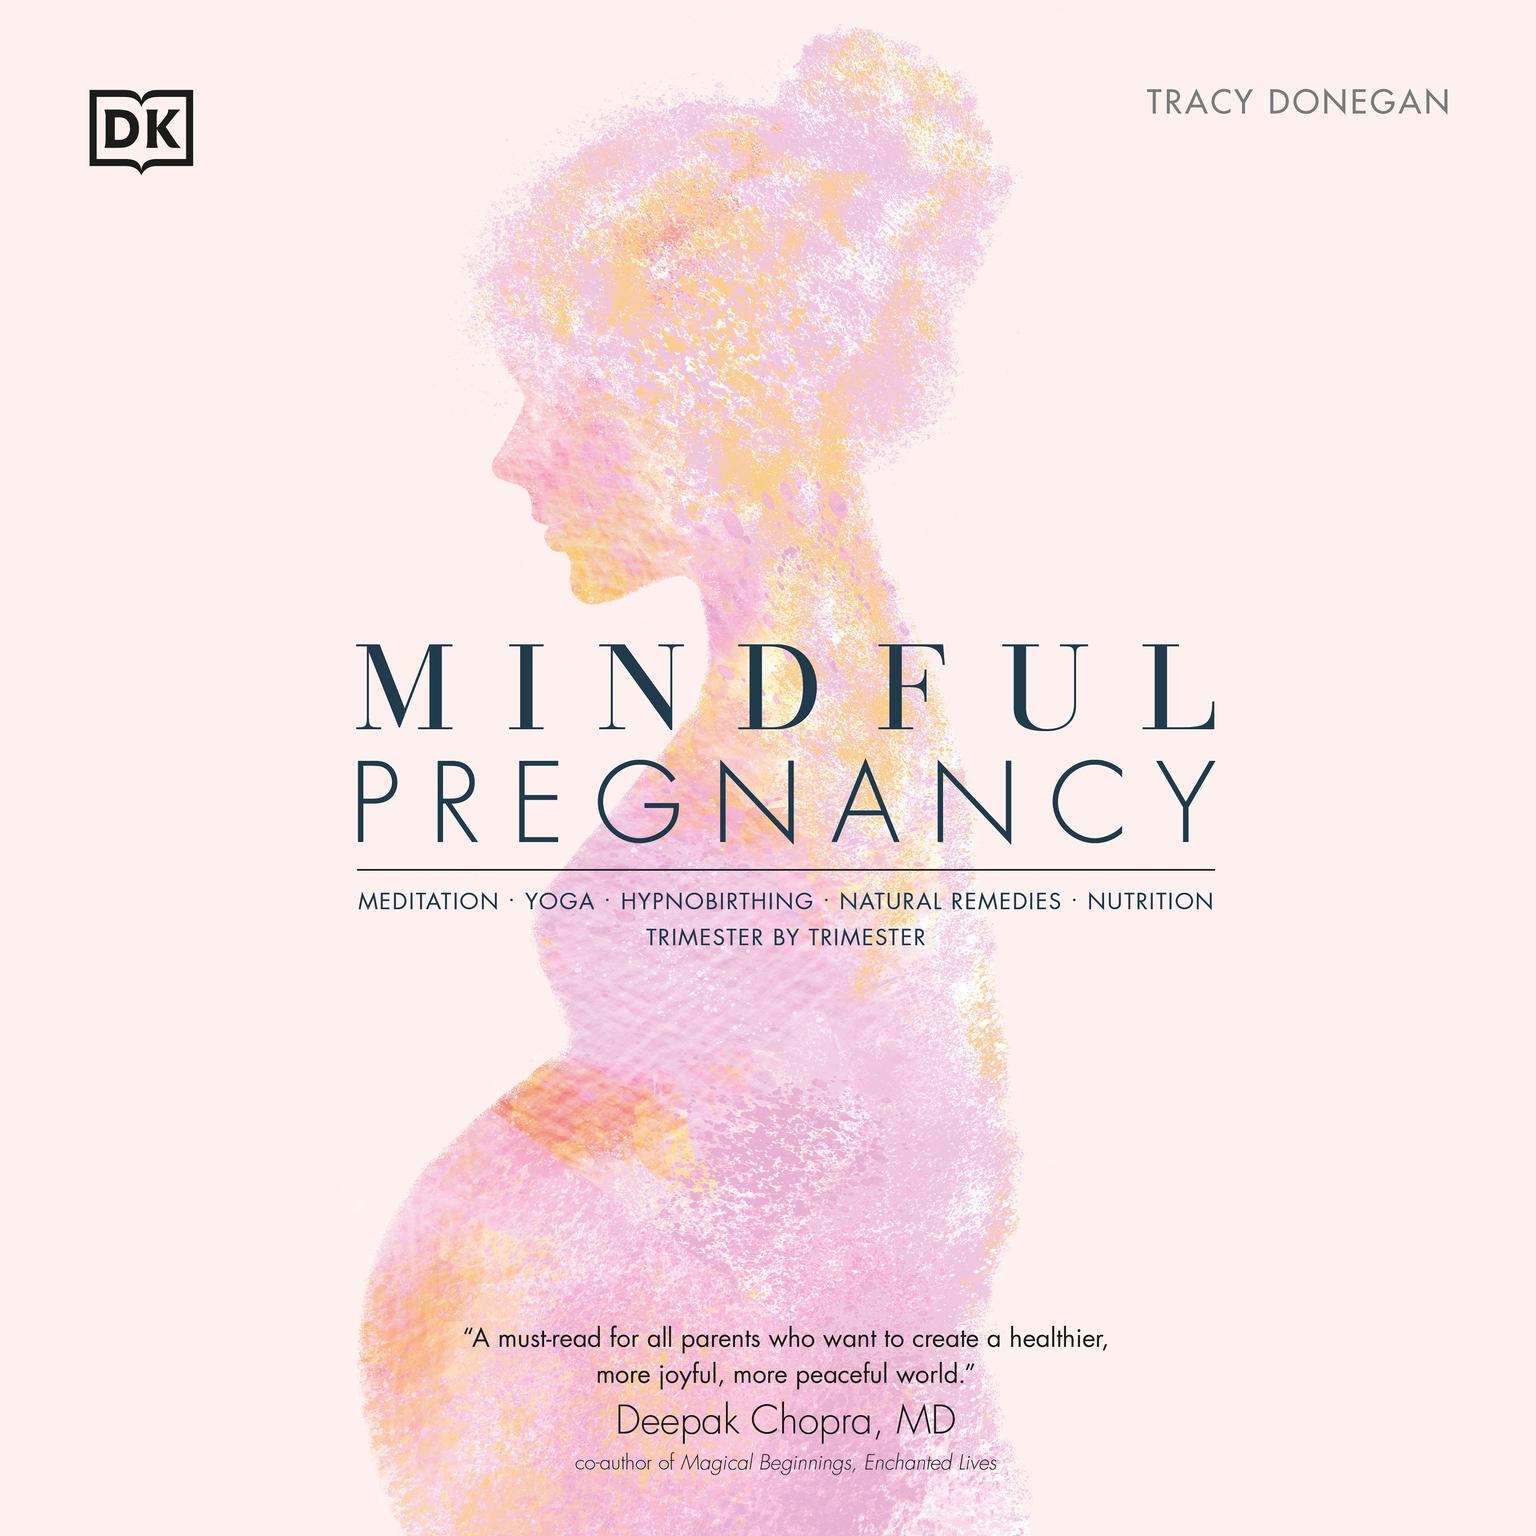 Mindful Pregnancy: Meditation, Yoga, Hypnobirthing, Natural Remedies and Nutrition Audiobook, by Tracy Donegan